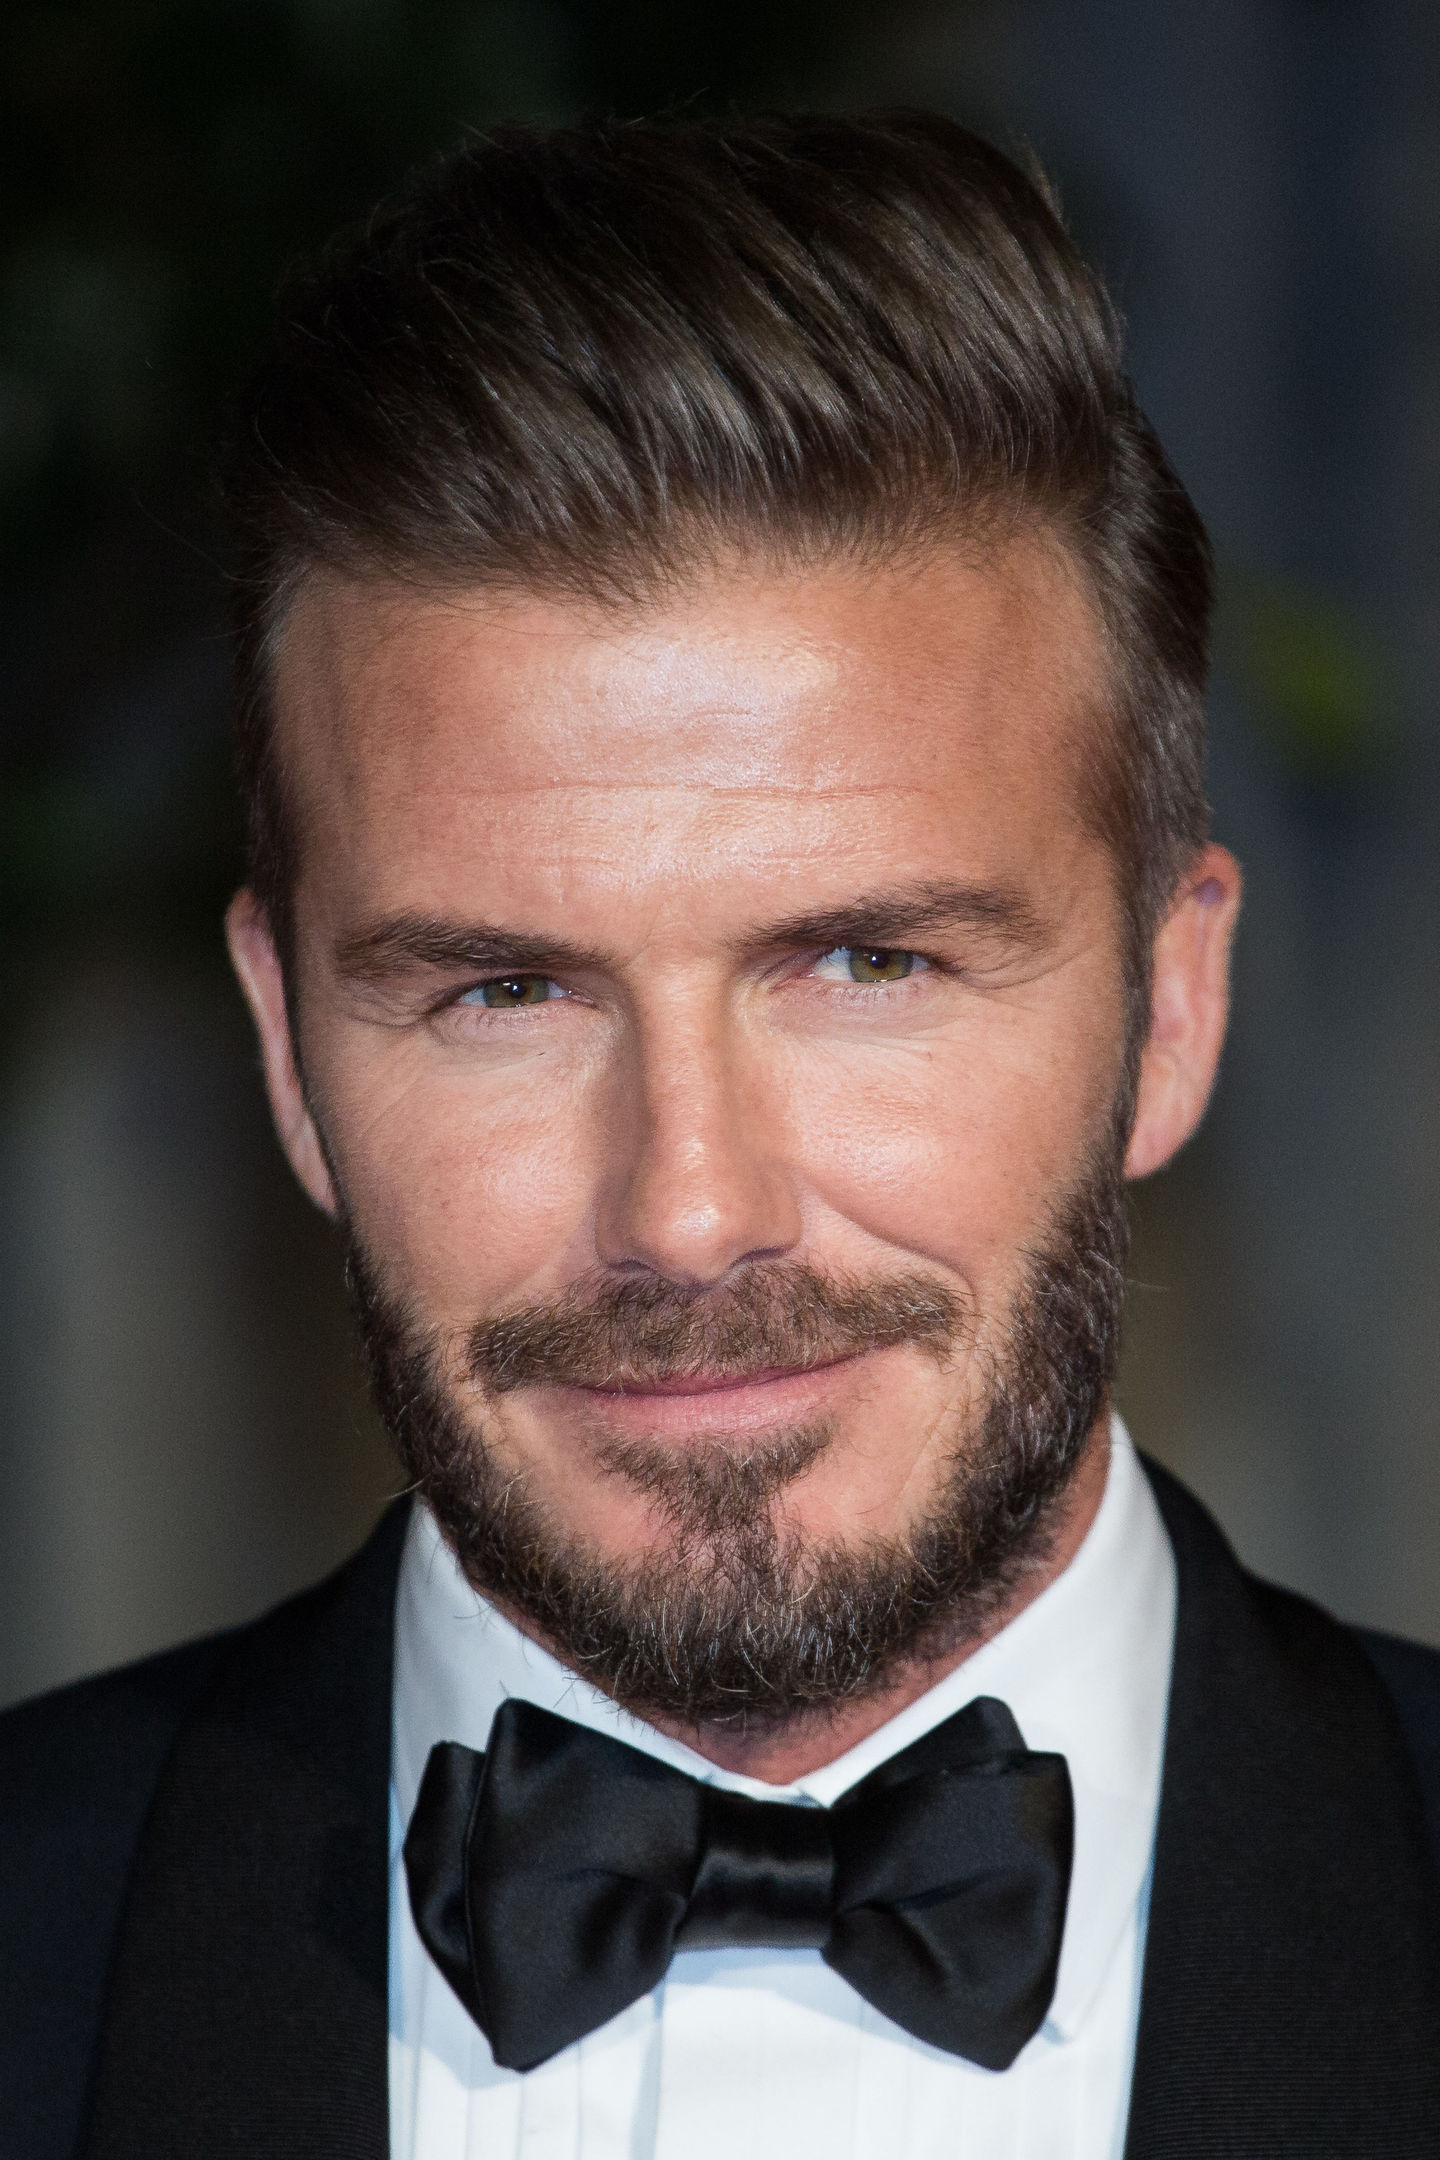 08/02/15 PA File Photo of David Beckham. See PA Feature TOPICAL Beckham. Picture credit should read: Daniel Leal-Olivas/PA Photos. WARNING: This picture must only be used to accompany PA Feature TOPICAL Beckham